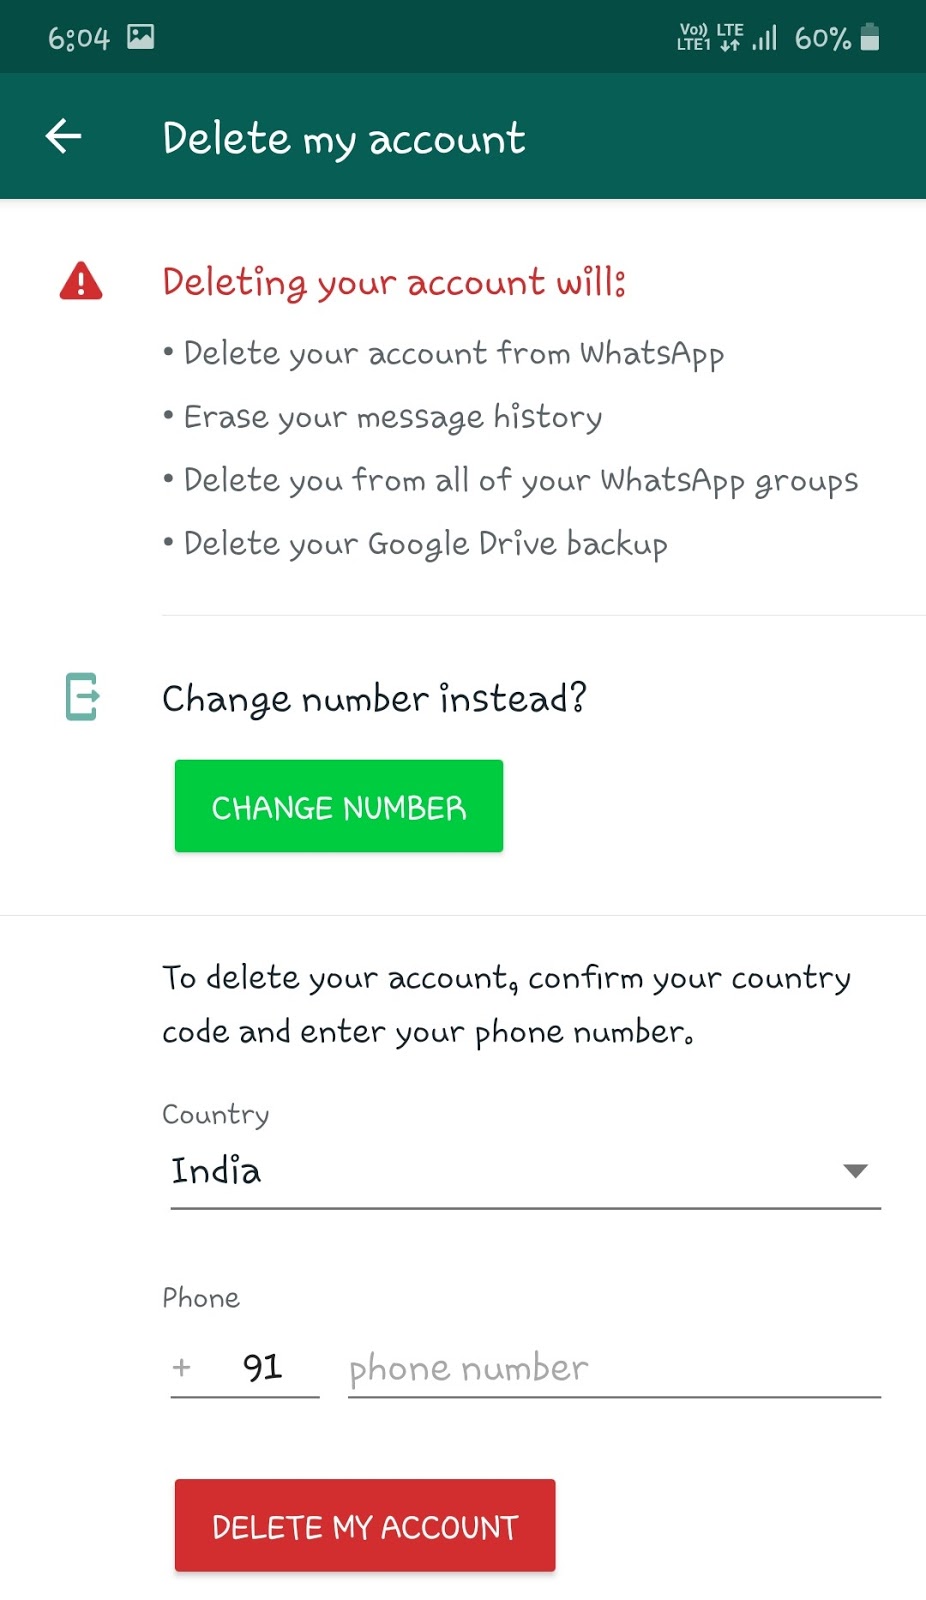 Enter your phone number and country code